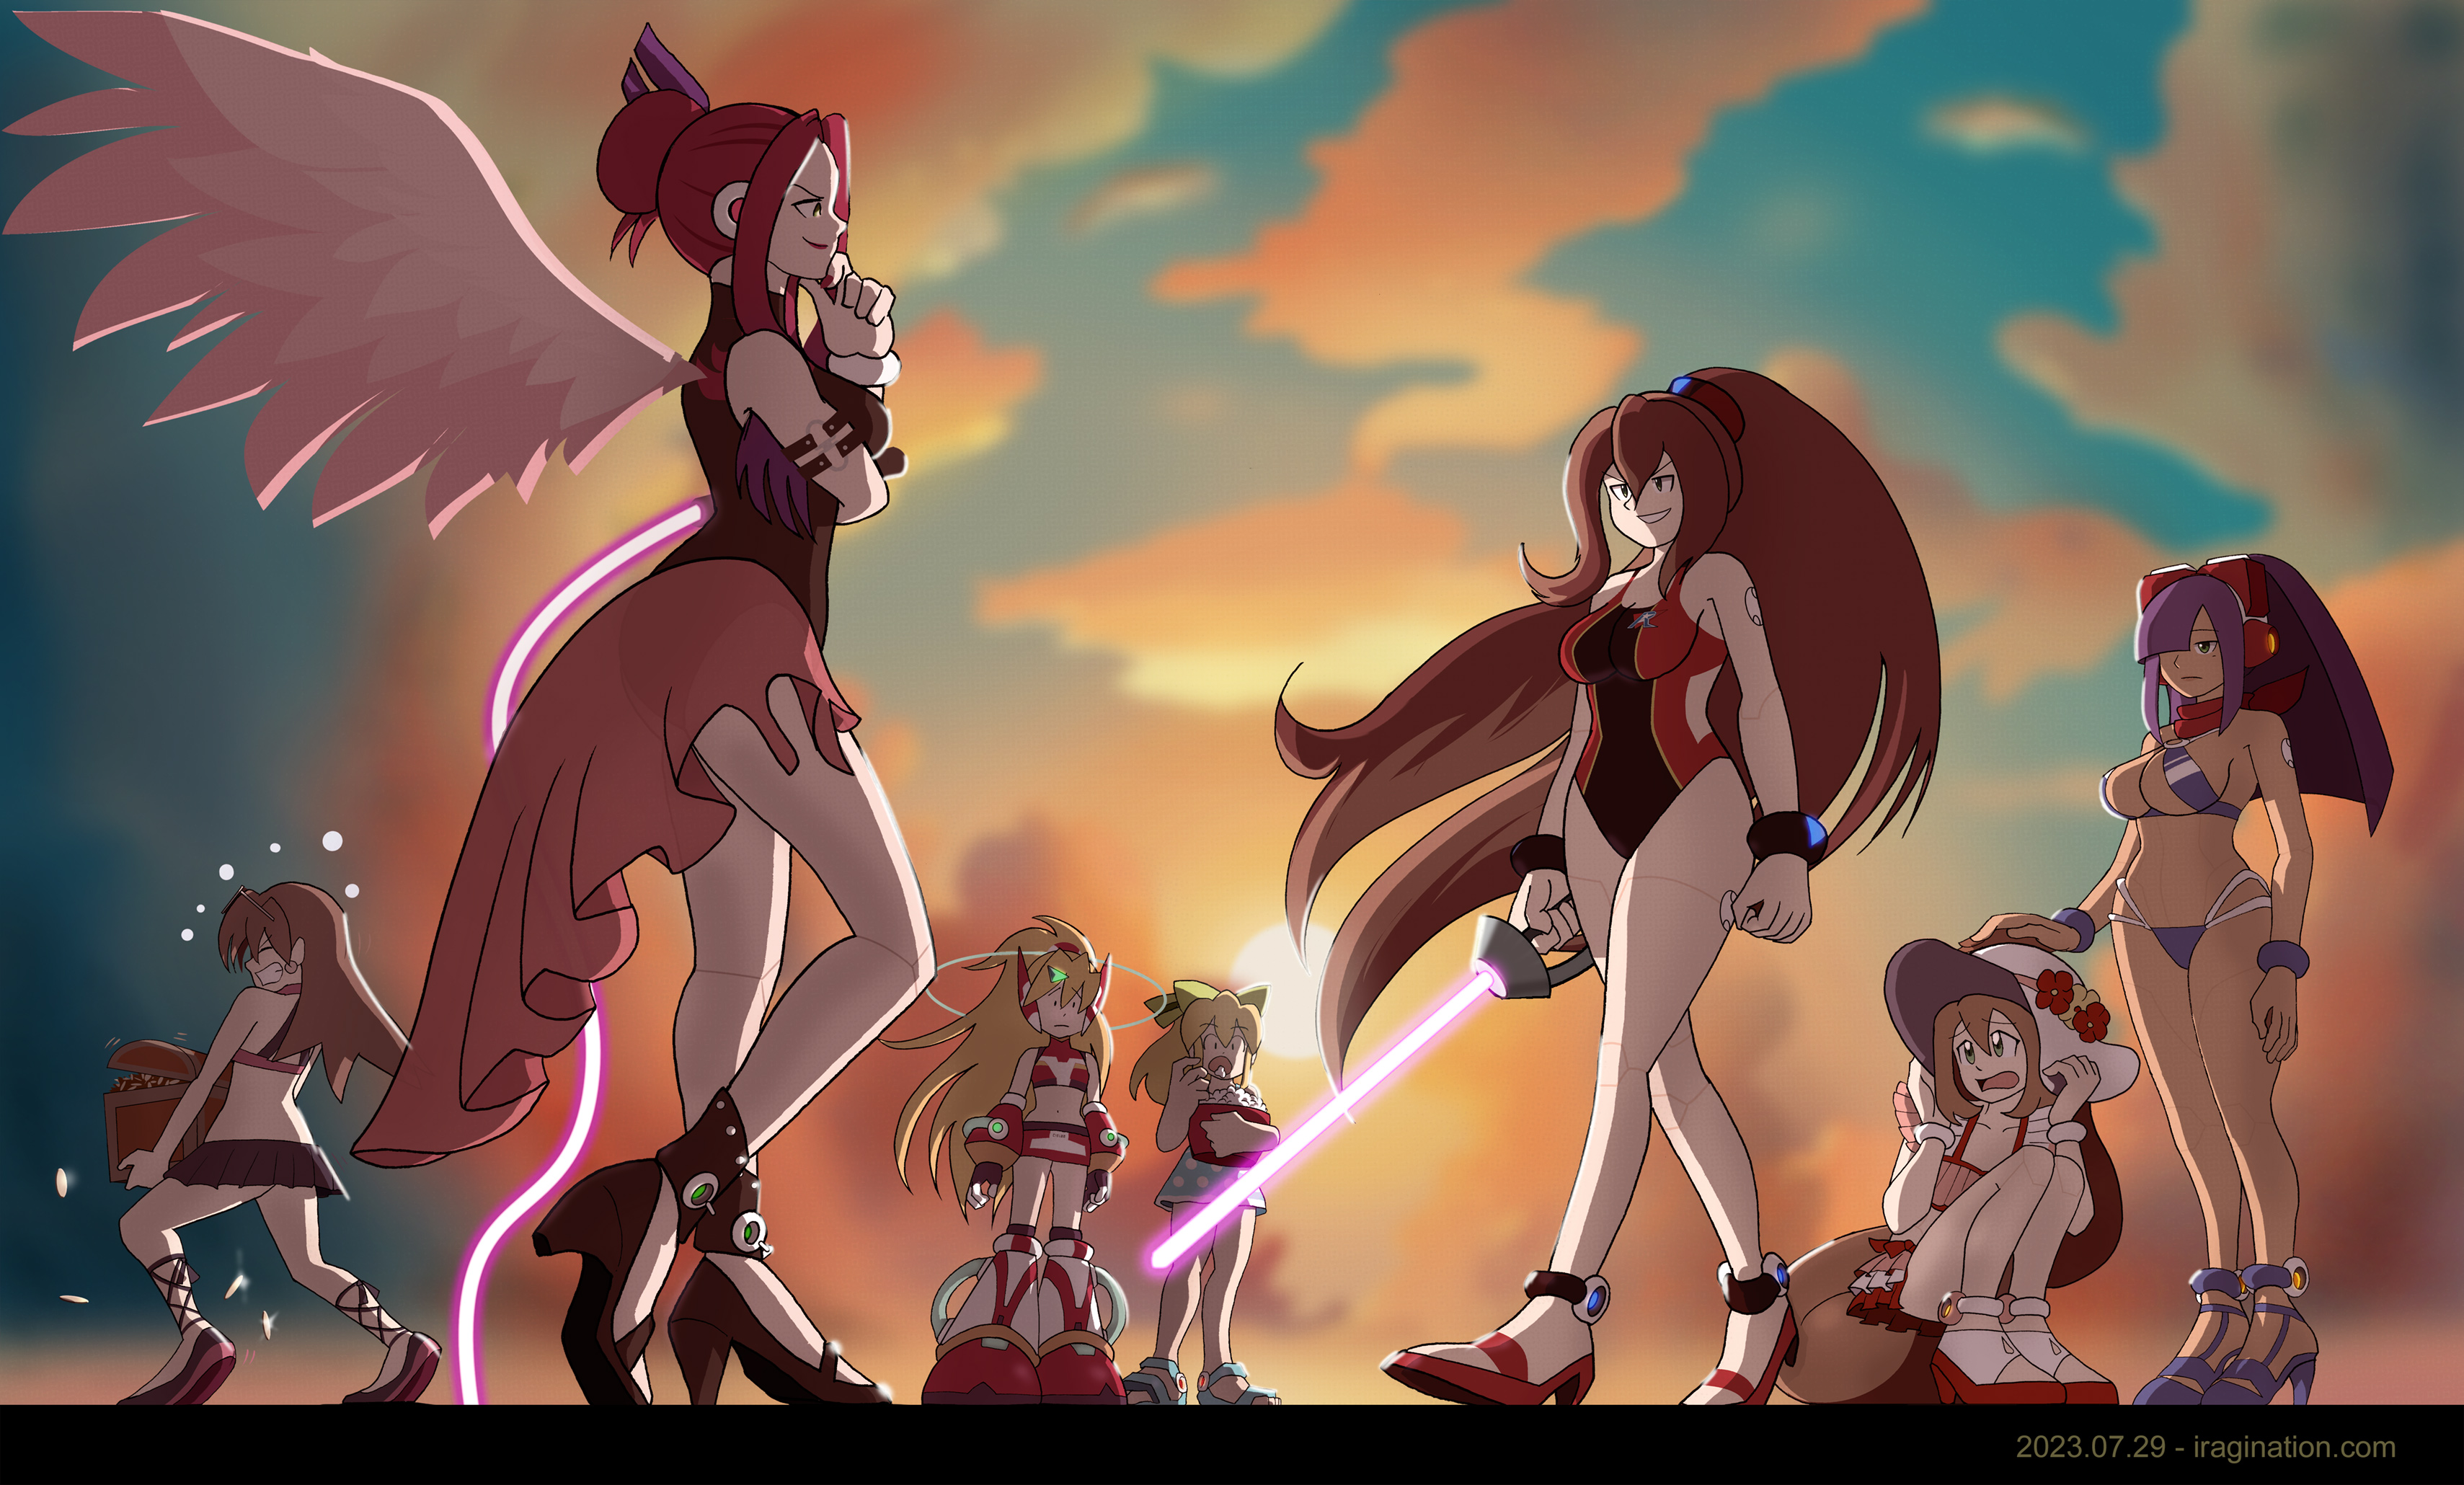 Settling The Last Scores
From left to right:

- Swimsuit Tron
- Swimsuit Ferham
- Swimsuit Ciel
- Swimsuit Roll
- Swimsuit Iris Another*
- Swimsuit Iris
- Swimsuit Layer

As the Mega Man X DiVE online service comes closer to an end, I thought about some plot threads I did not have time to develop further. This image, for example, could be considered a sequel to the little [url=https://www.iragination.com/illust/displayimage.php?pid=531]Valentine 2021 comic[/url] I did for that year. I will let you fill in the story details.

* There is no official Swimsuit Iris Another design. But since I saw some renditions online designed by several artists, I decided I might as well try my own for fun.

Mega Man X DiVE © CAPCOM

[b]References[/b]
[url=https://hotpot.ai/s/art-generator/8-tOj3JRS1C2Fujp8]Background assisted by AI[/url]
Keywords: Tron_Bonne ferham ciel roll iris layer